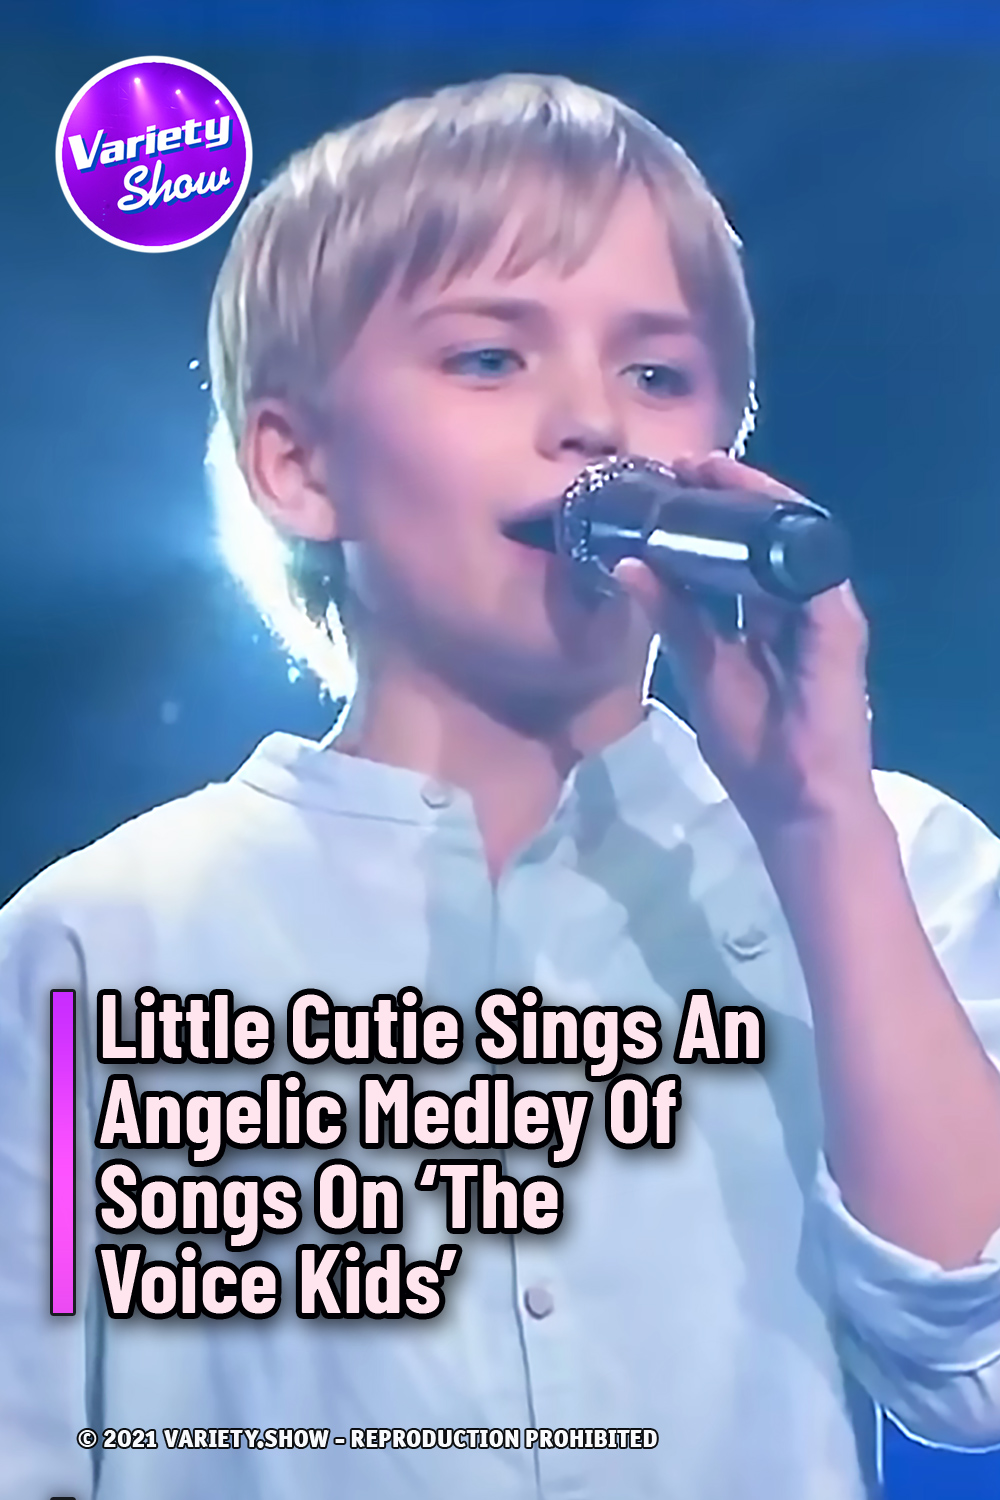 Little Cutie Sings An Angelic Medley Of Songs On ‘The Voice Kids ...